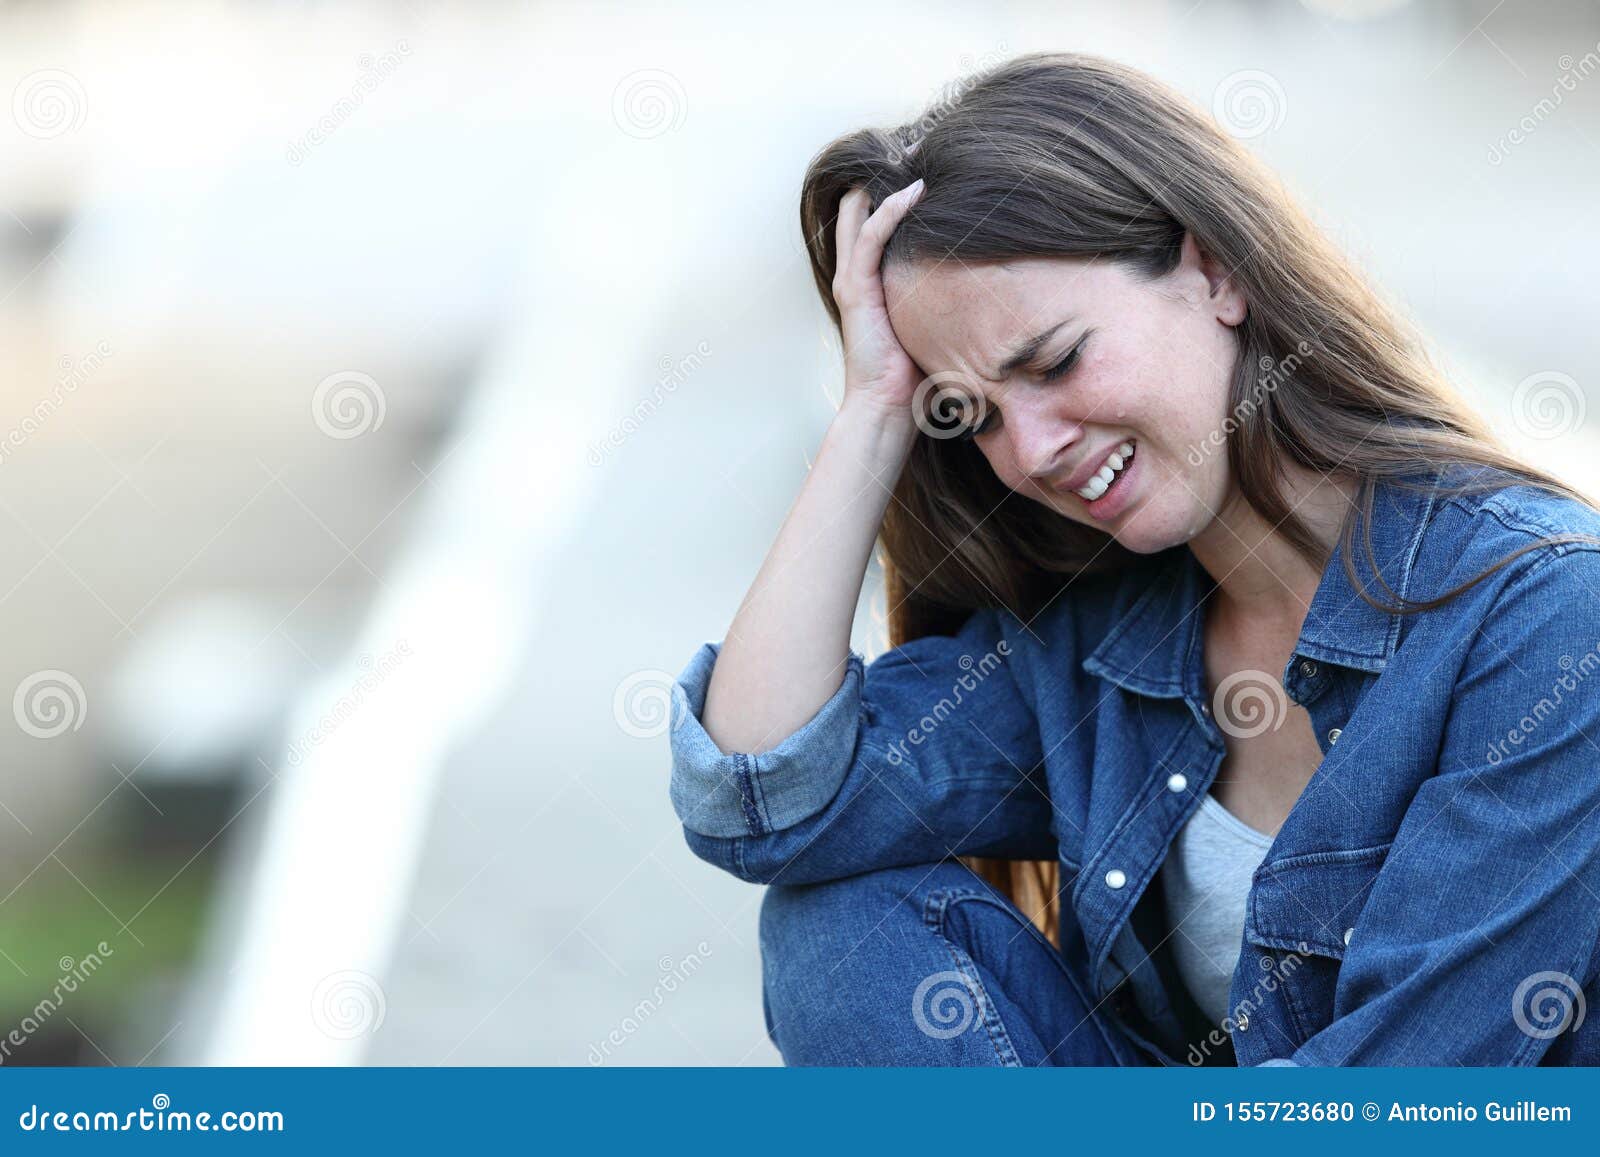 Sad Woman Crying in the Street Stock Photo - Image of depression ...